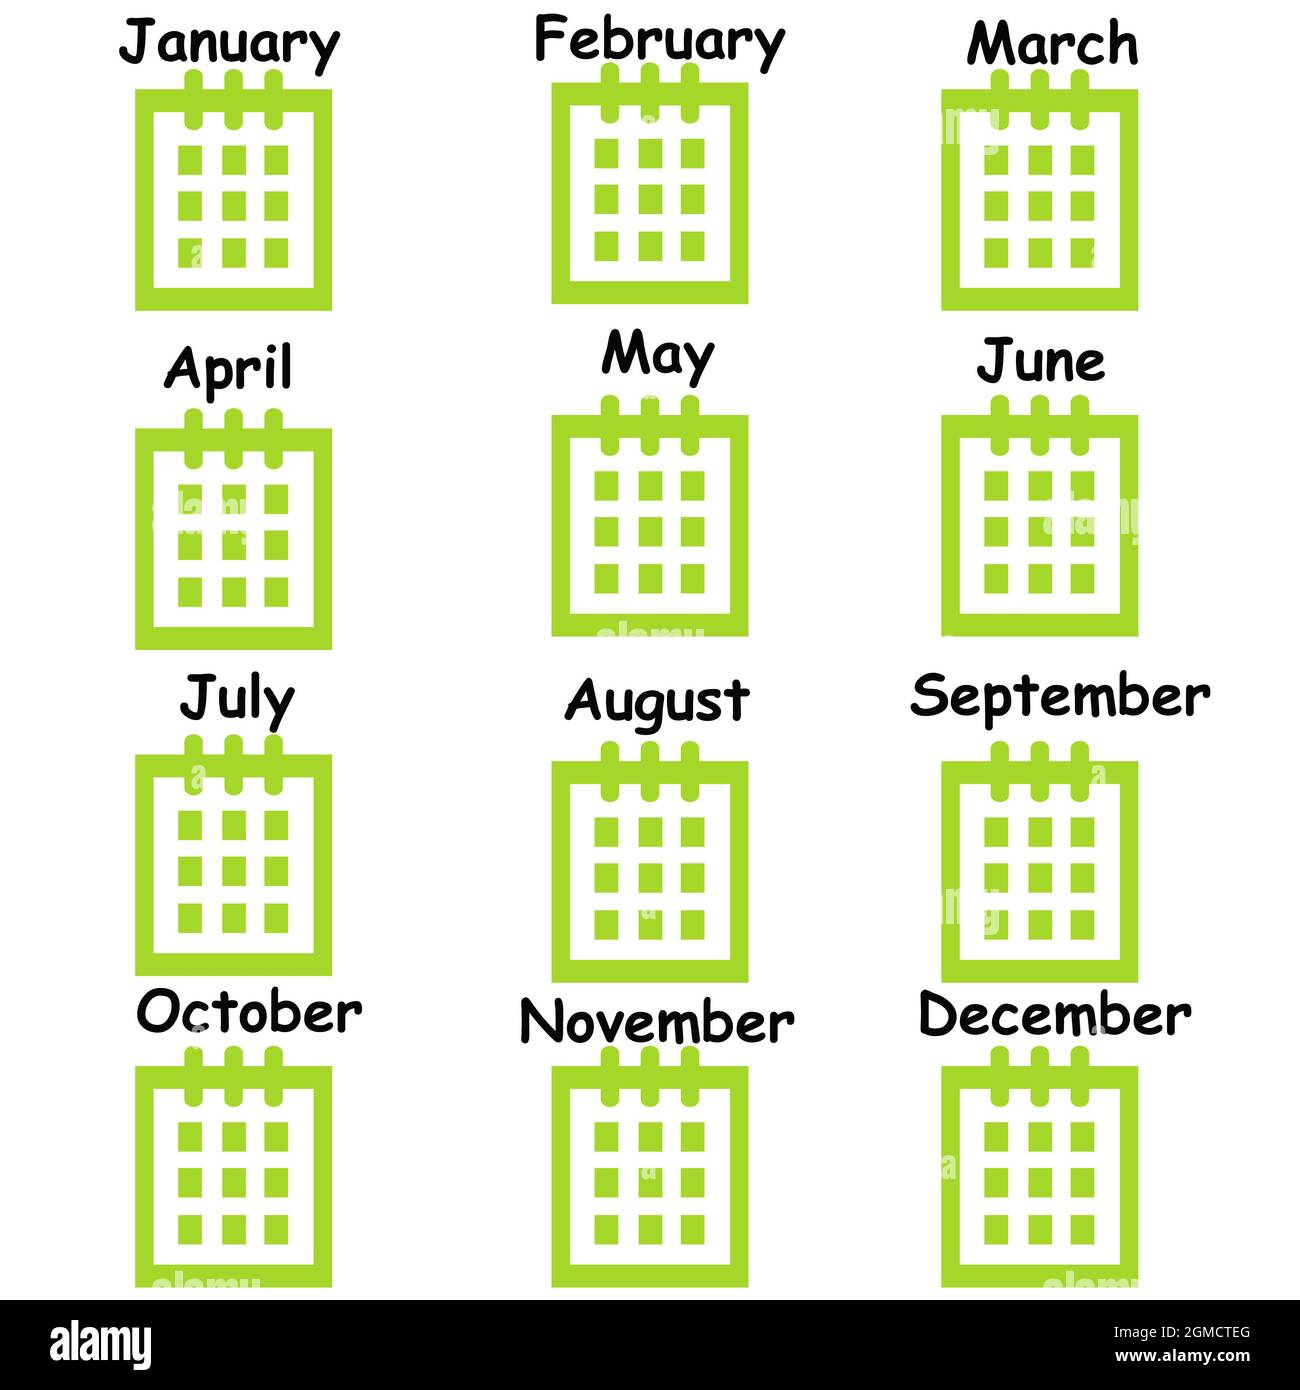 calendar with all months of the year - illustration Stock Photo - Alamy